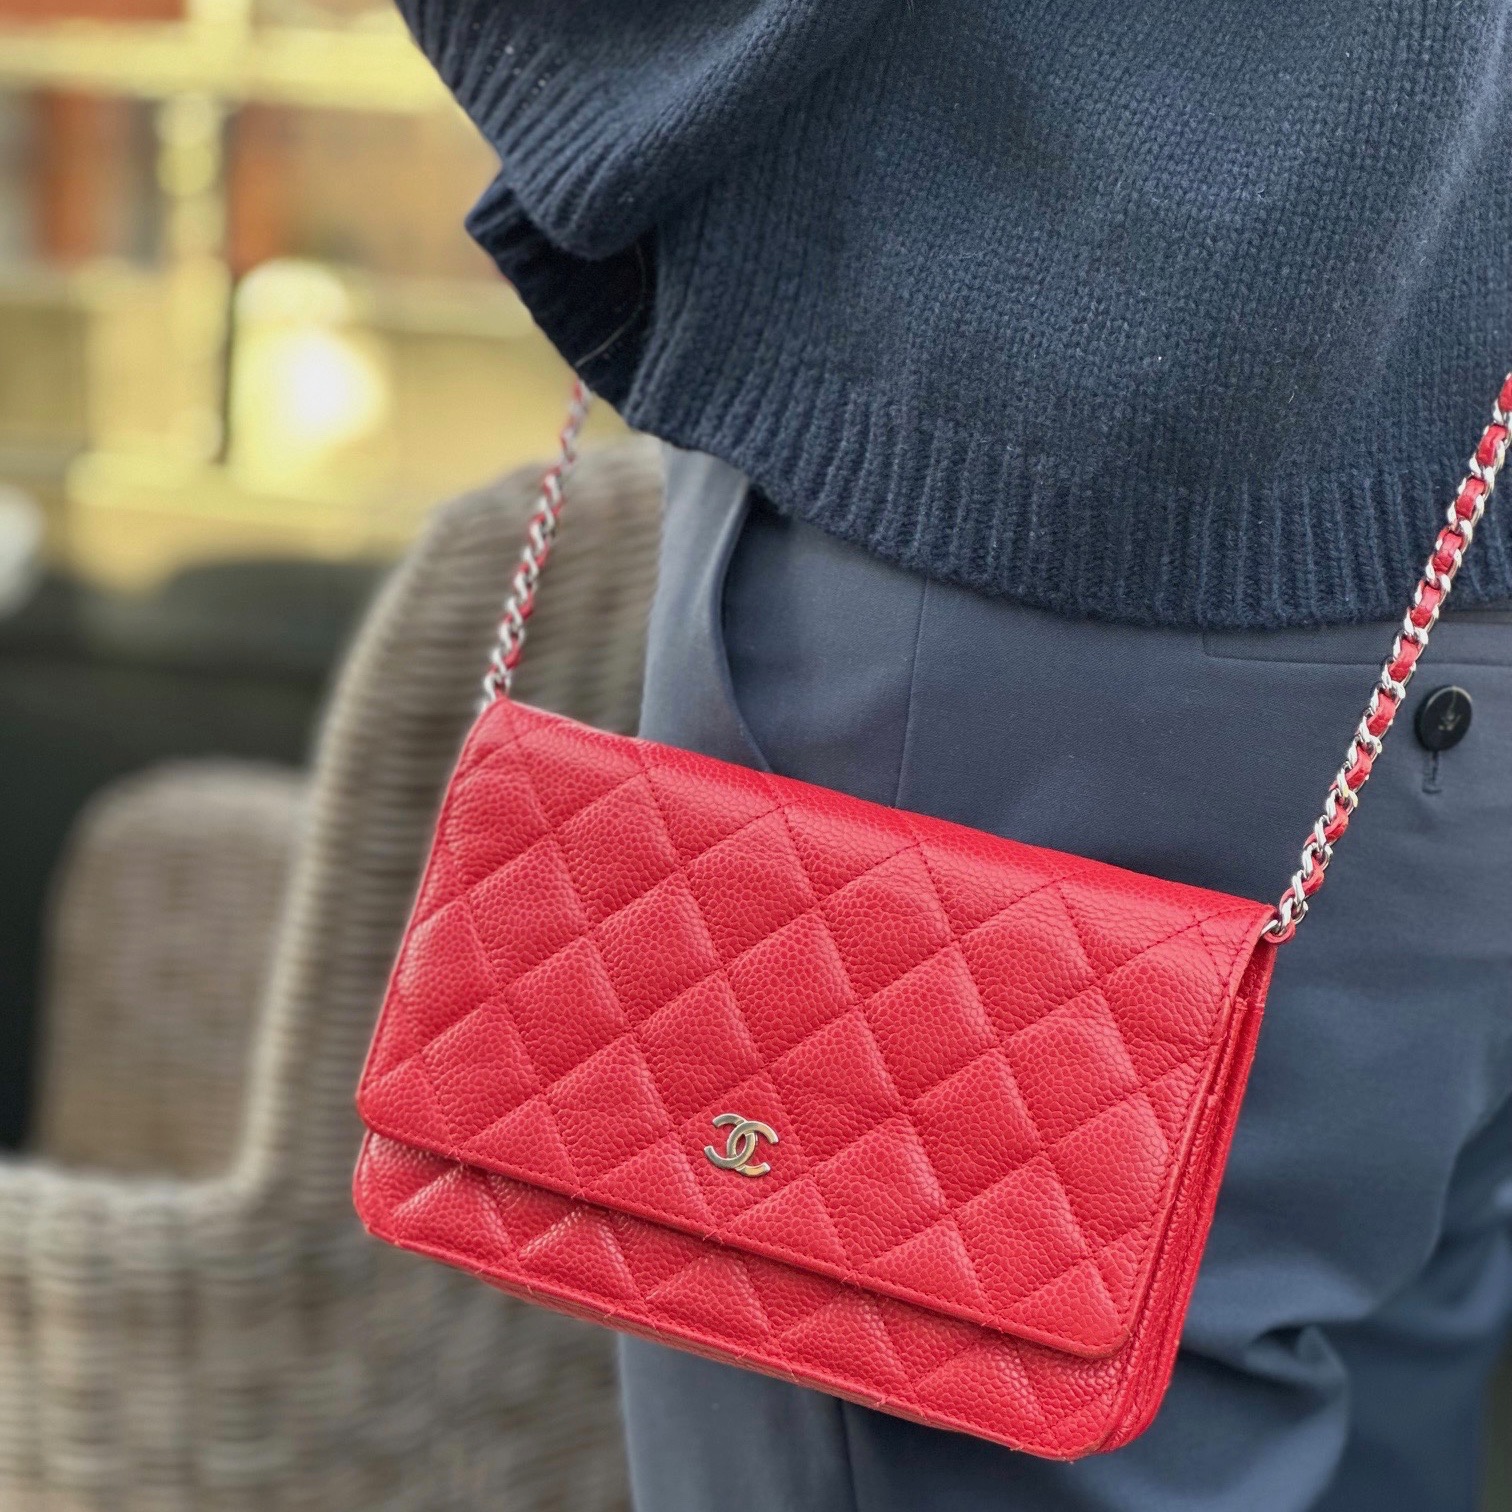 CHANEL WOC (WALLET ON CHAIN) IN RED CAVIAR LEATHER - Still in fashion